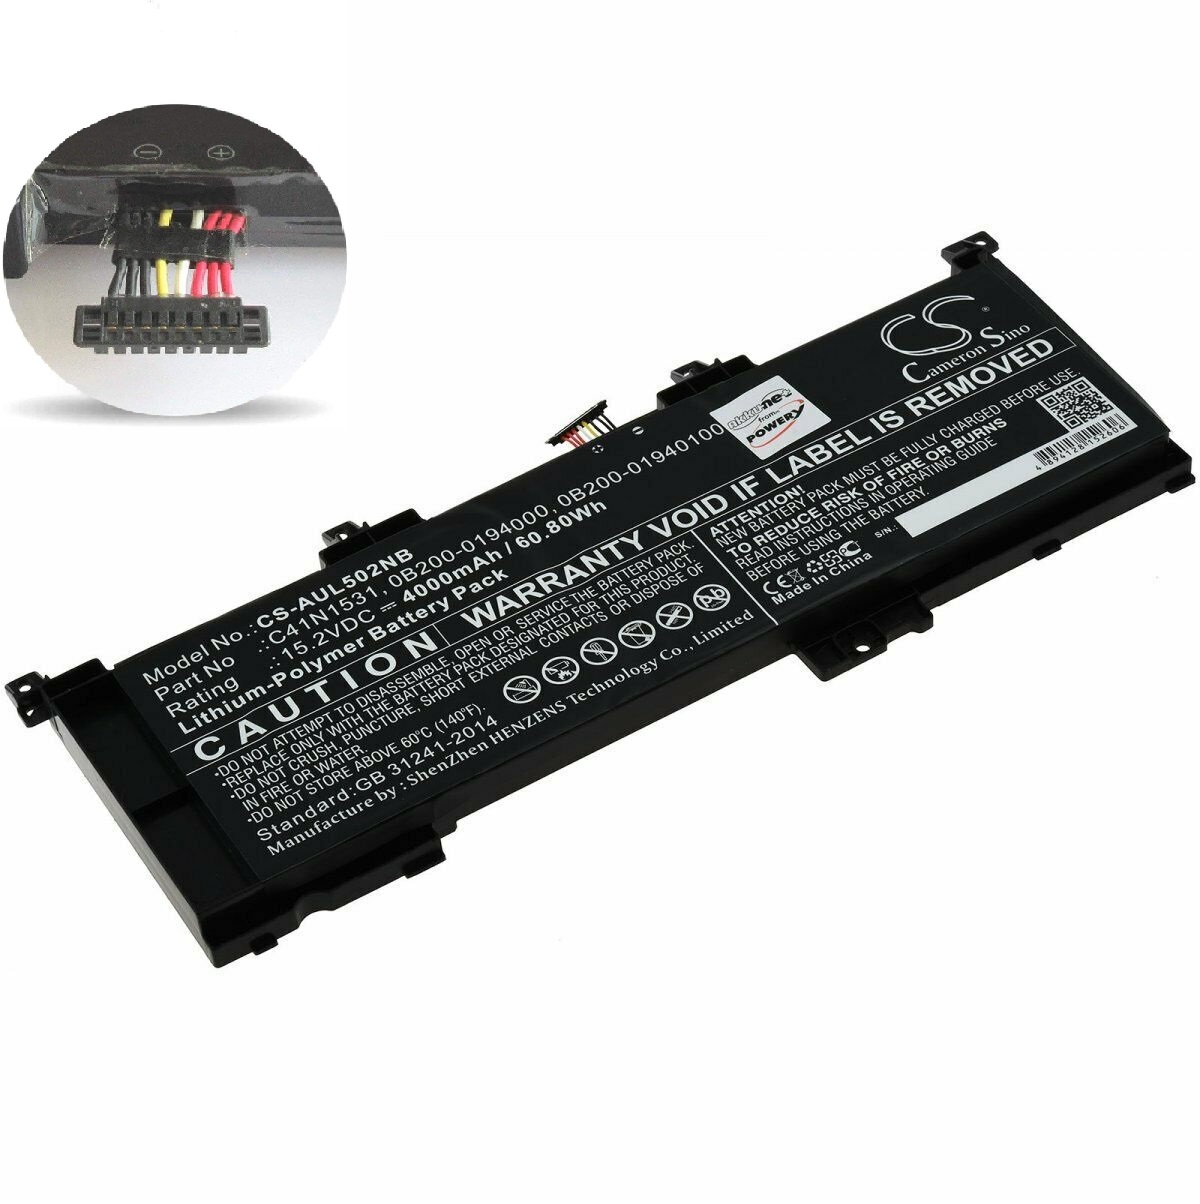 Accu voor C41N1531 0B200-01940100 Asus GL502VS-1A GL502VS-1E GL502VT-1B GL502VY GL502VY-1A (compatible)